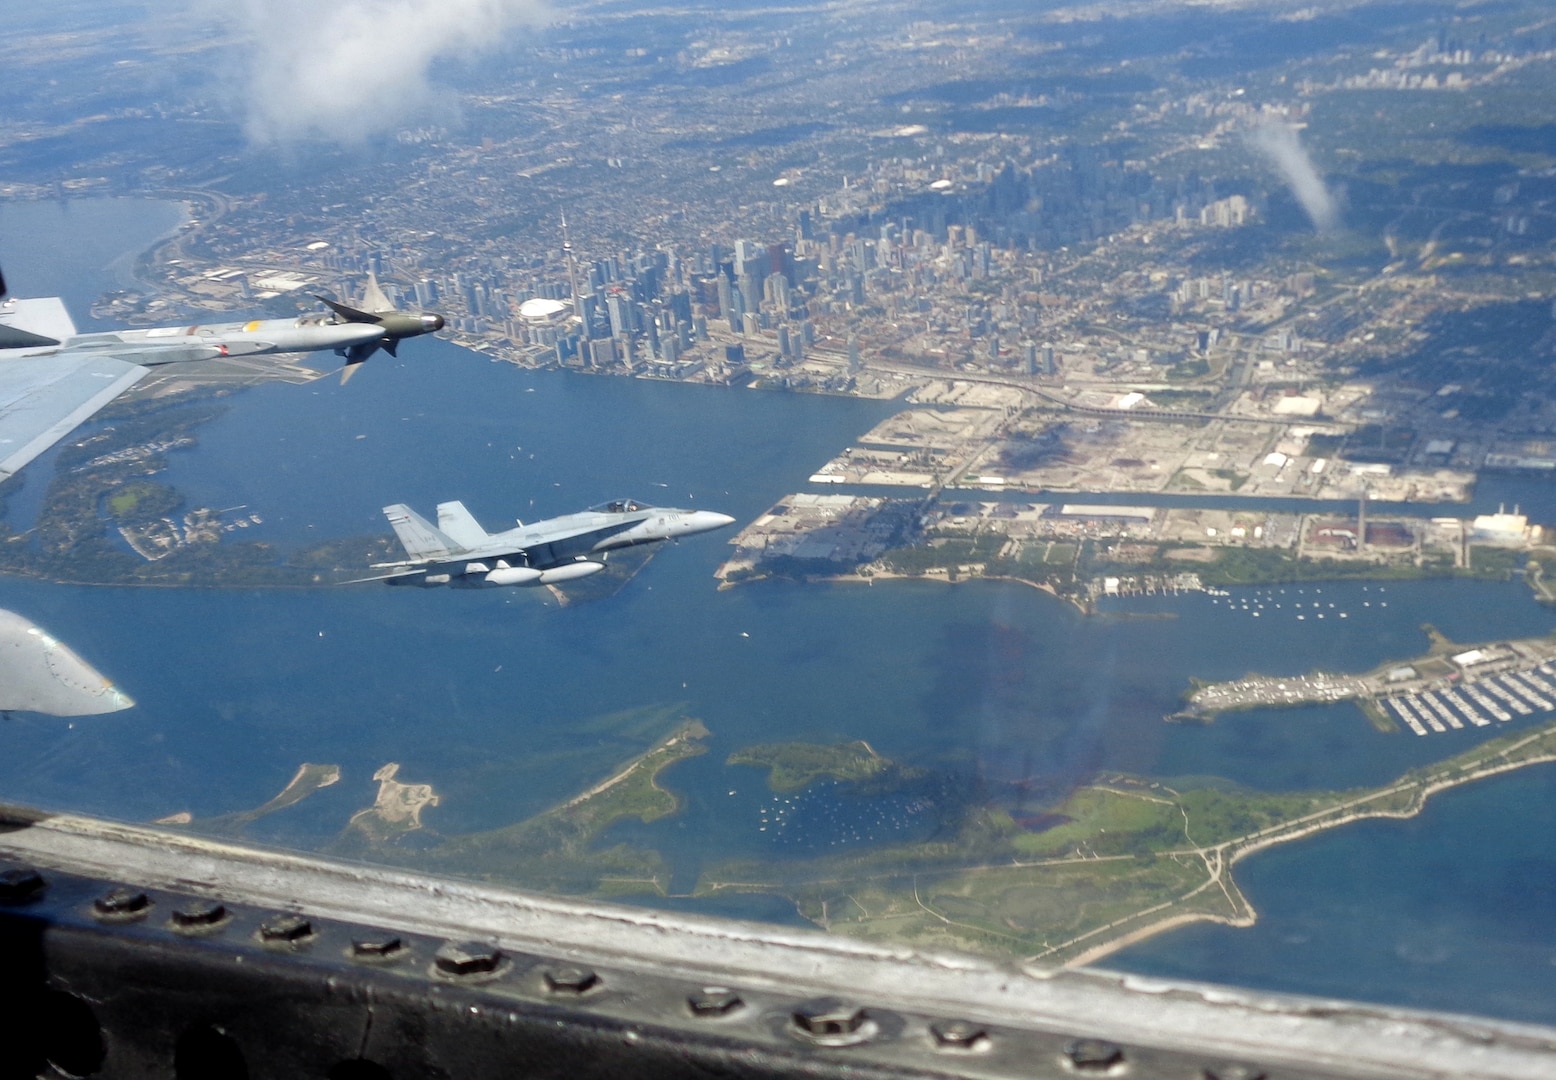 Royal Canadian Air Force CF-18 Hornets participate in binational NORAD air defence exercise over the Greater Toronto Area (GTA) on July 30, 2020.